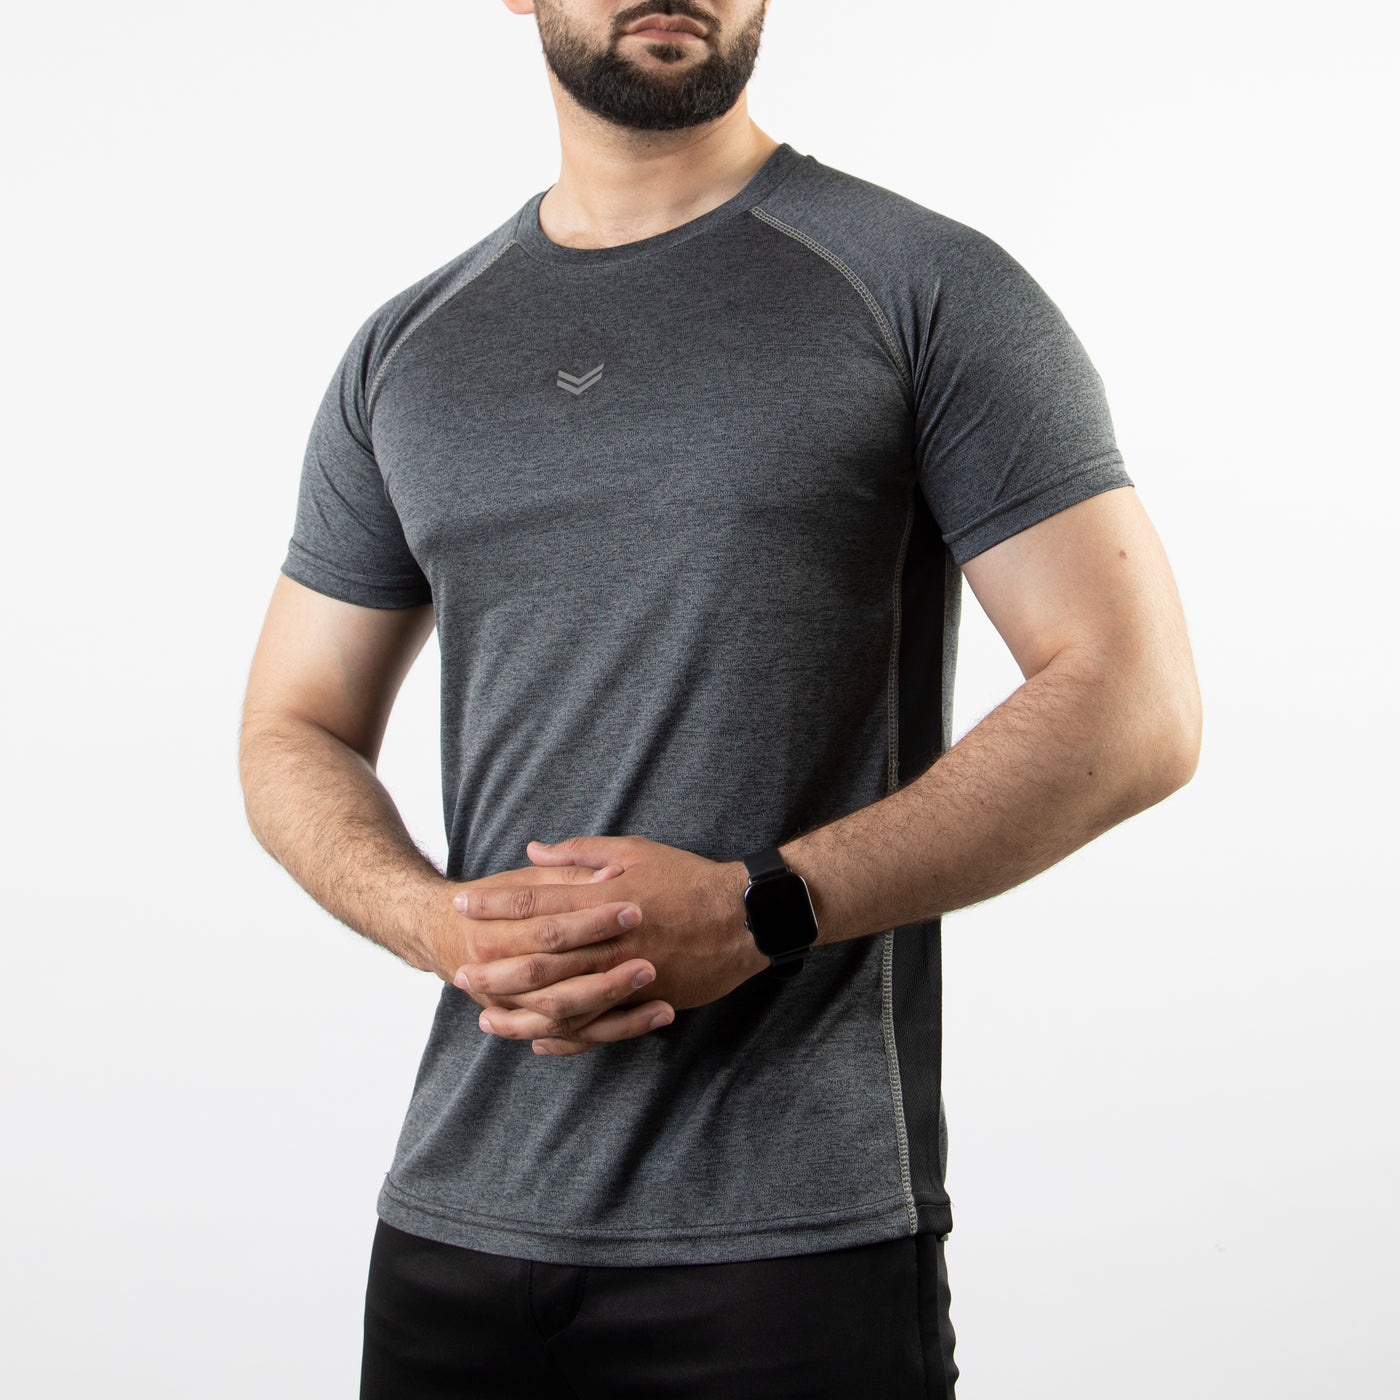 Textured Charcoal Quick Dry Tee with Thread Detailing & Black Panel